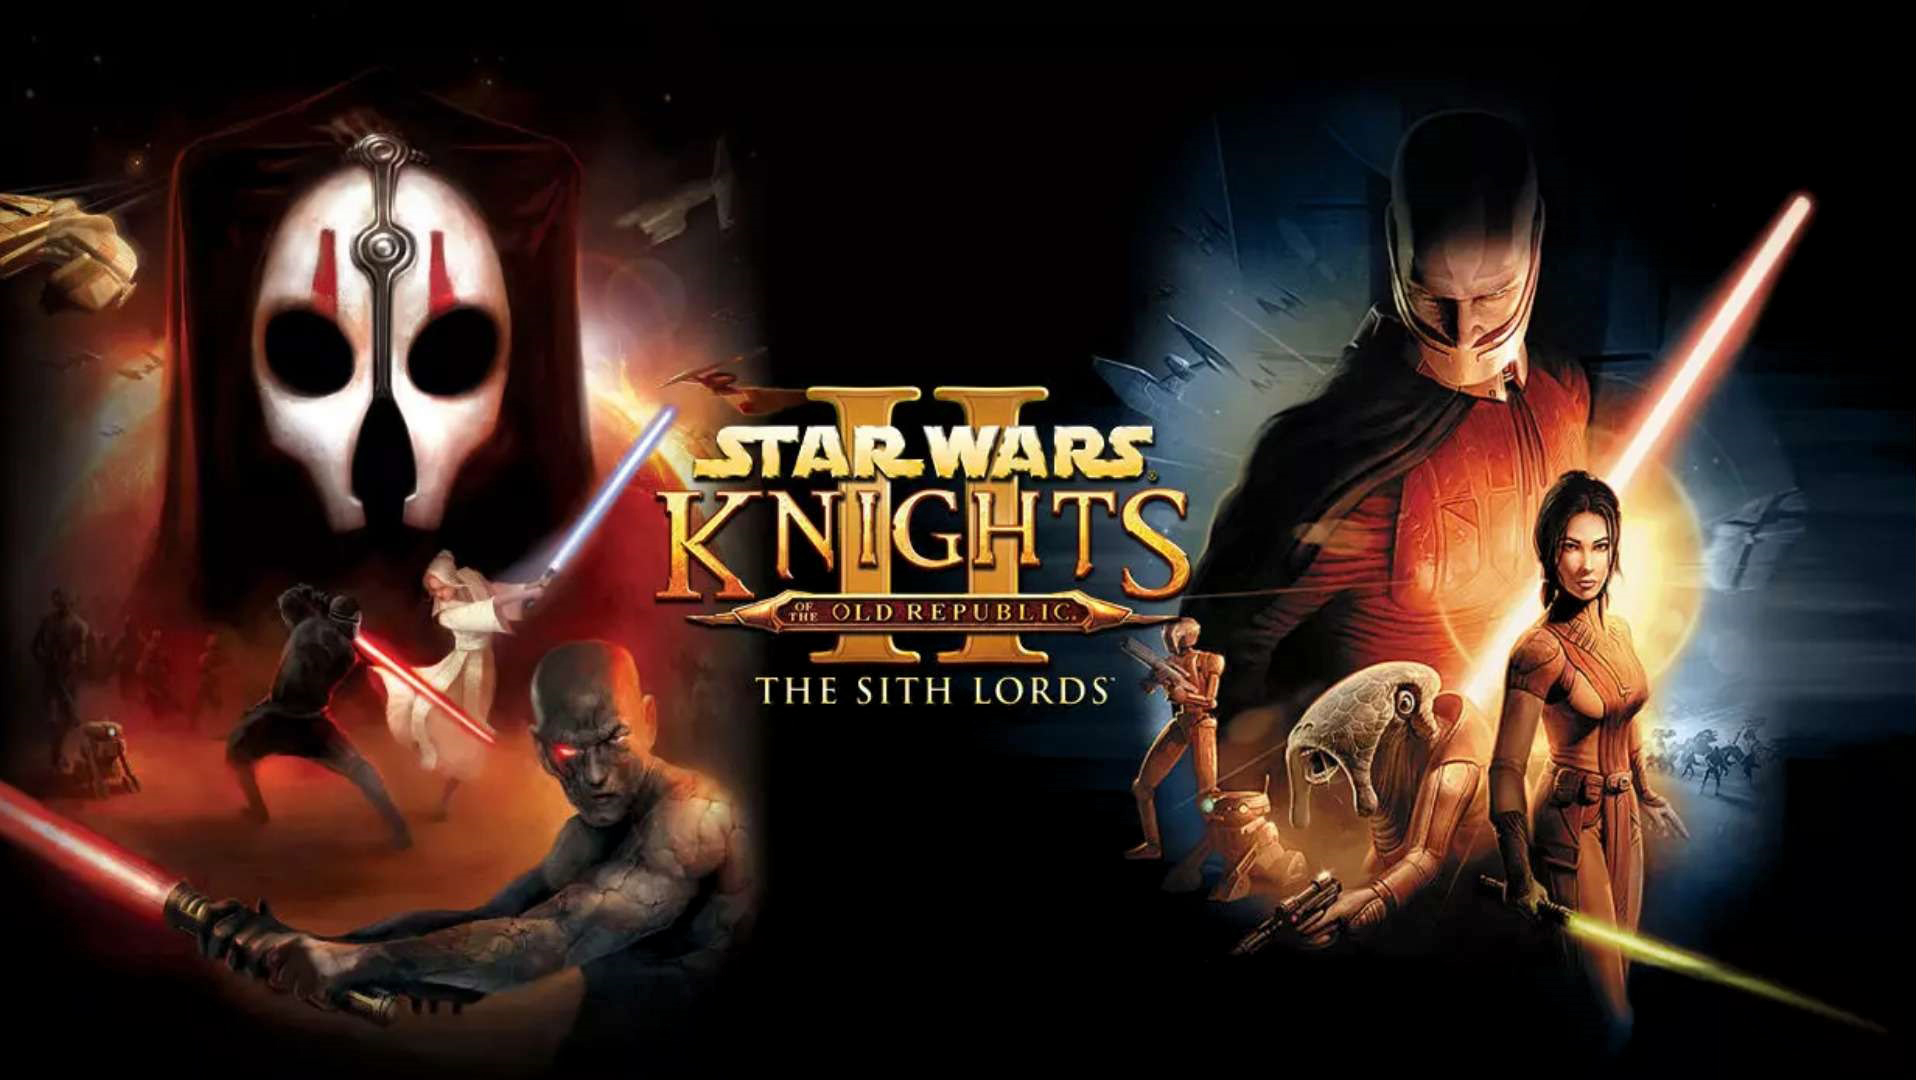 Key art of the Star Wars: Knights of the Old Republic series